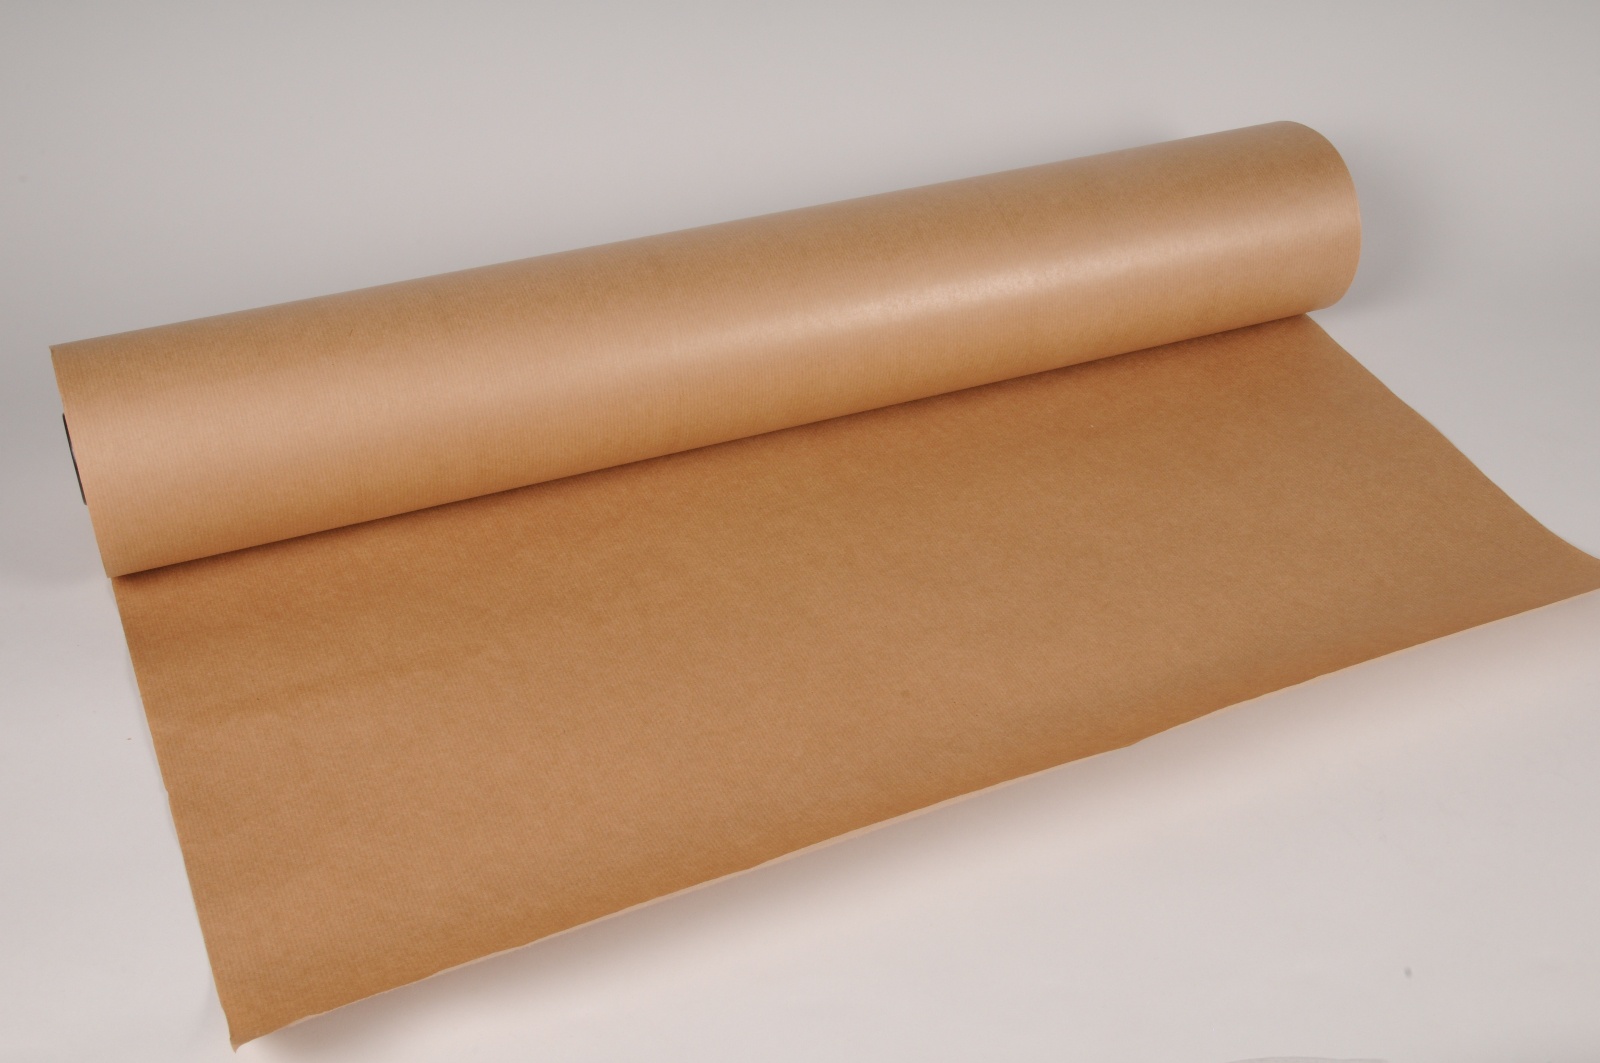 Pacon 5824 Kraft Paper Roll, 50 lbs., 24 x 1000 ft, Natural,Brown